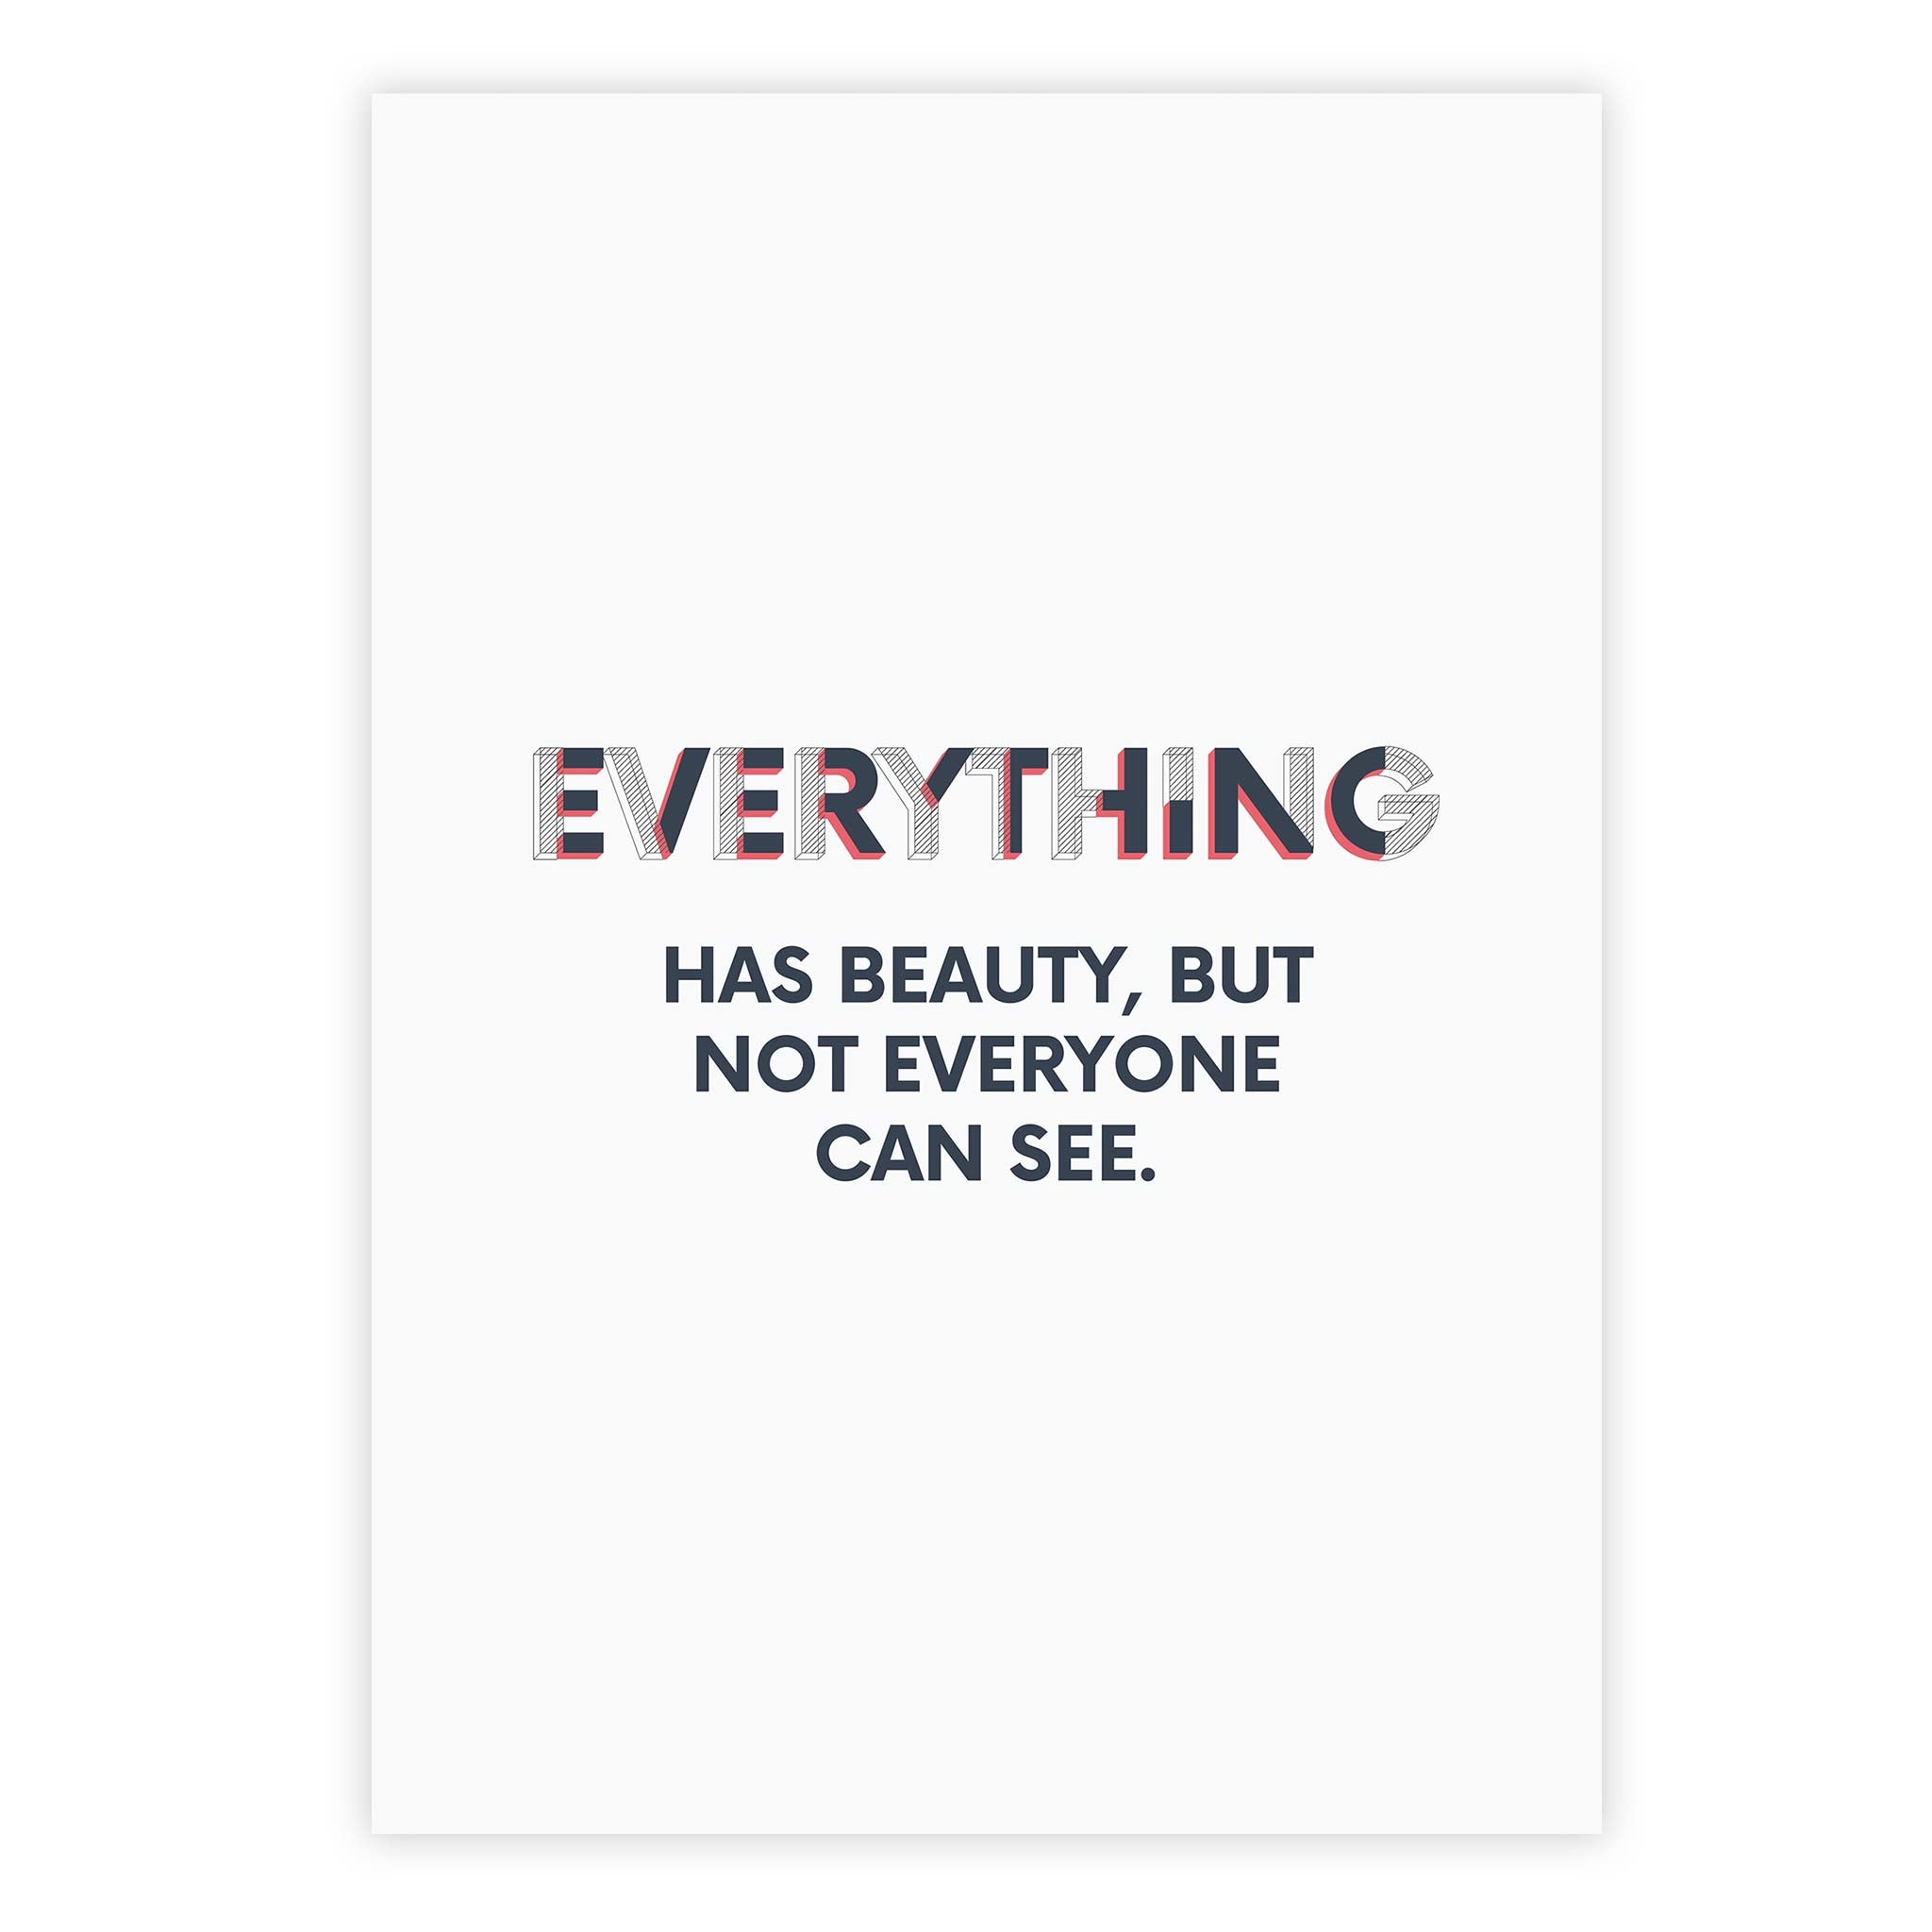 Everything has beauty, but not everyone can see